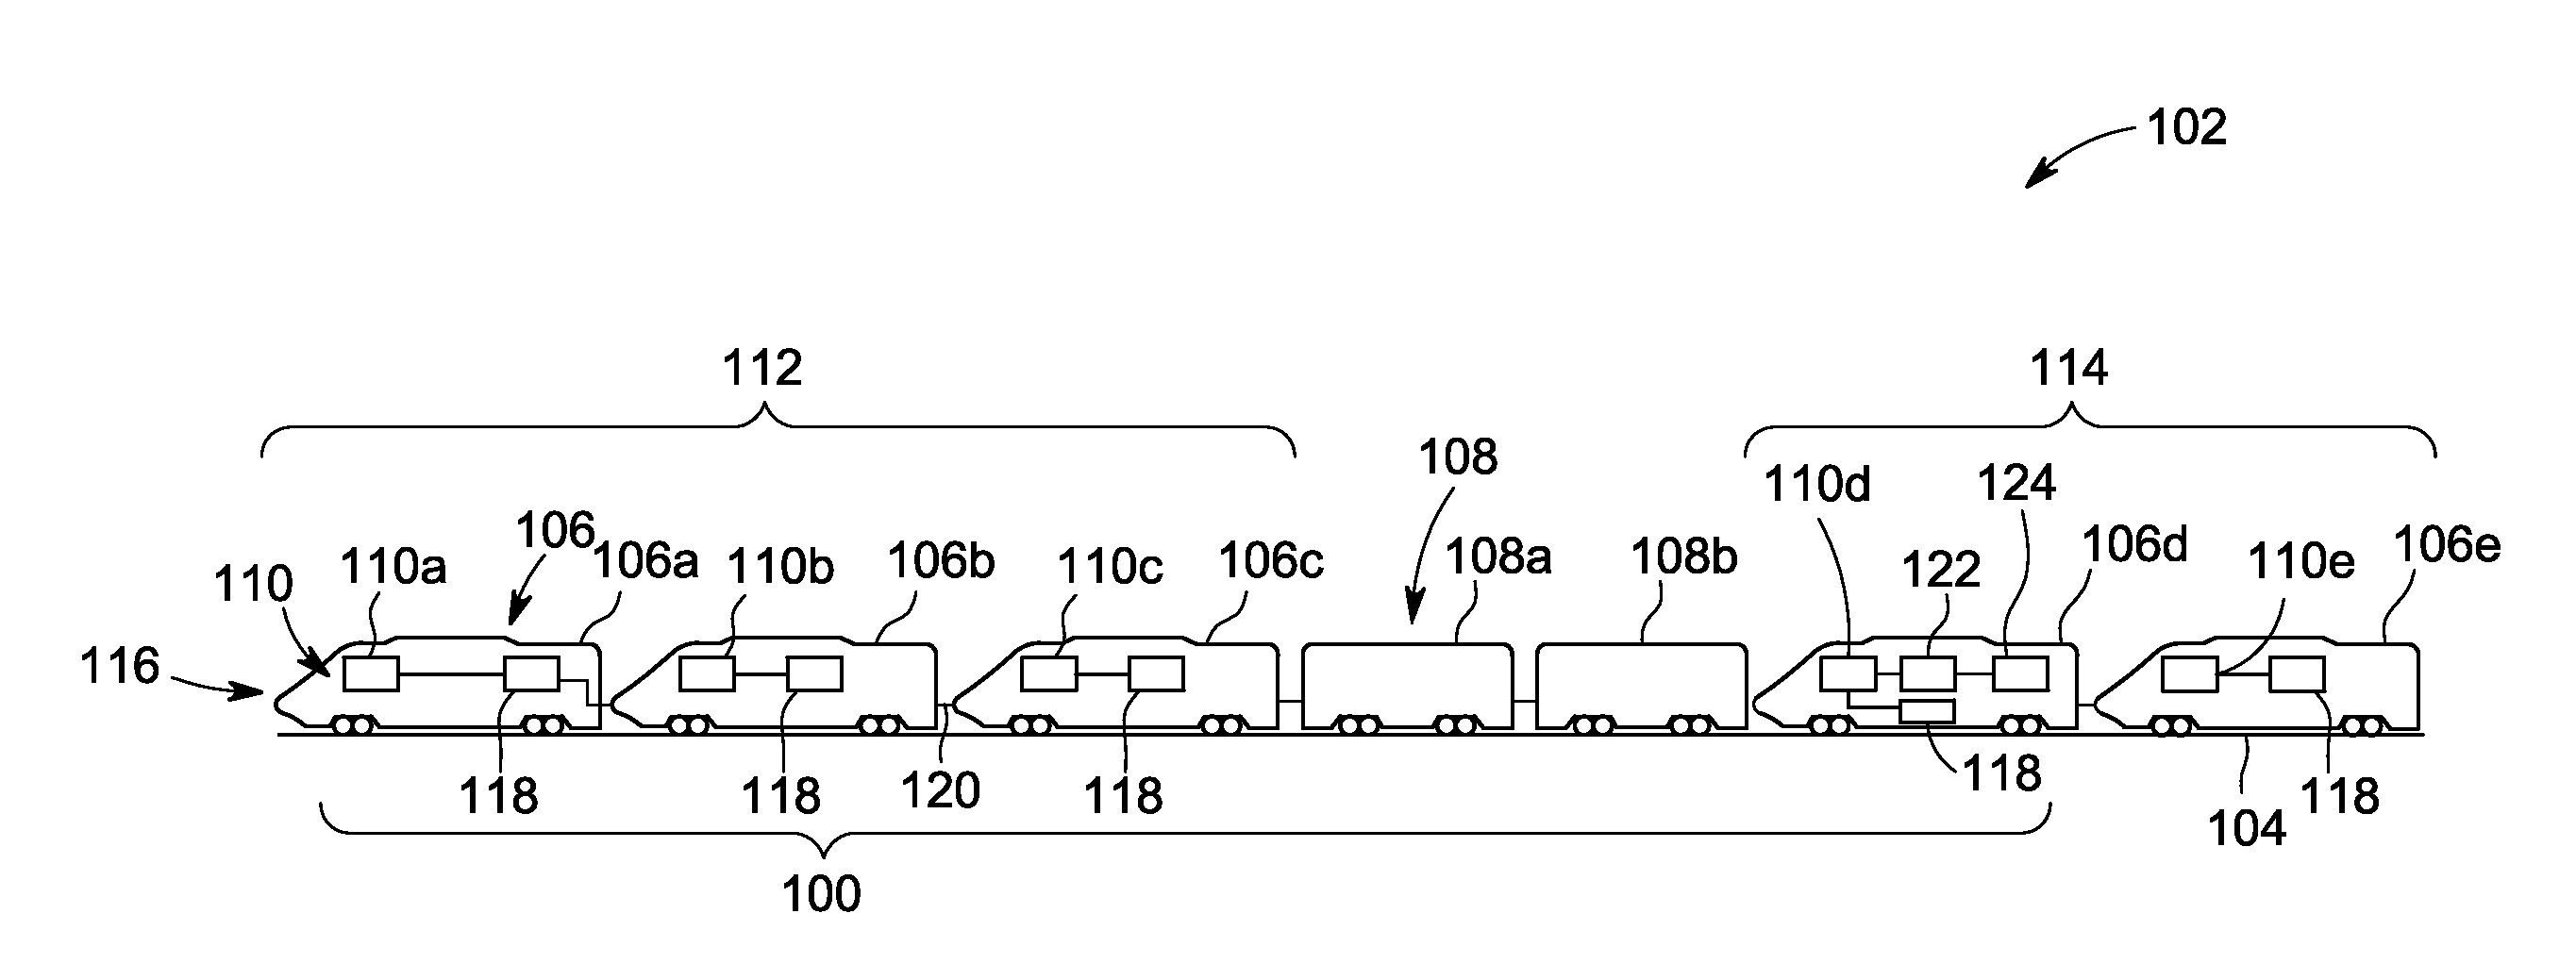 System and method for controlling a vehicle consist